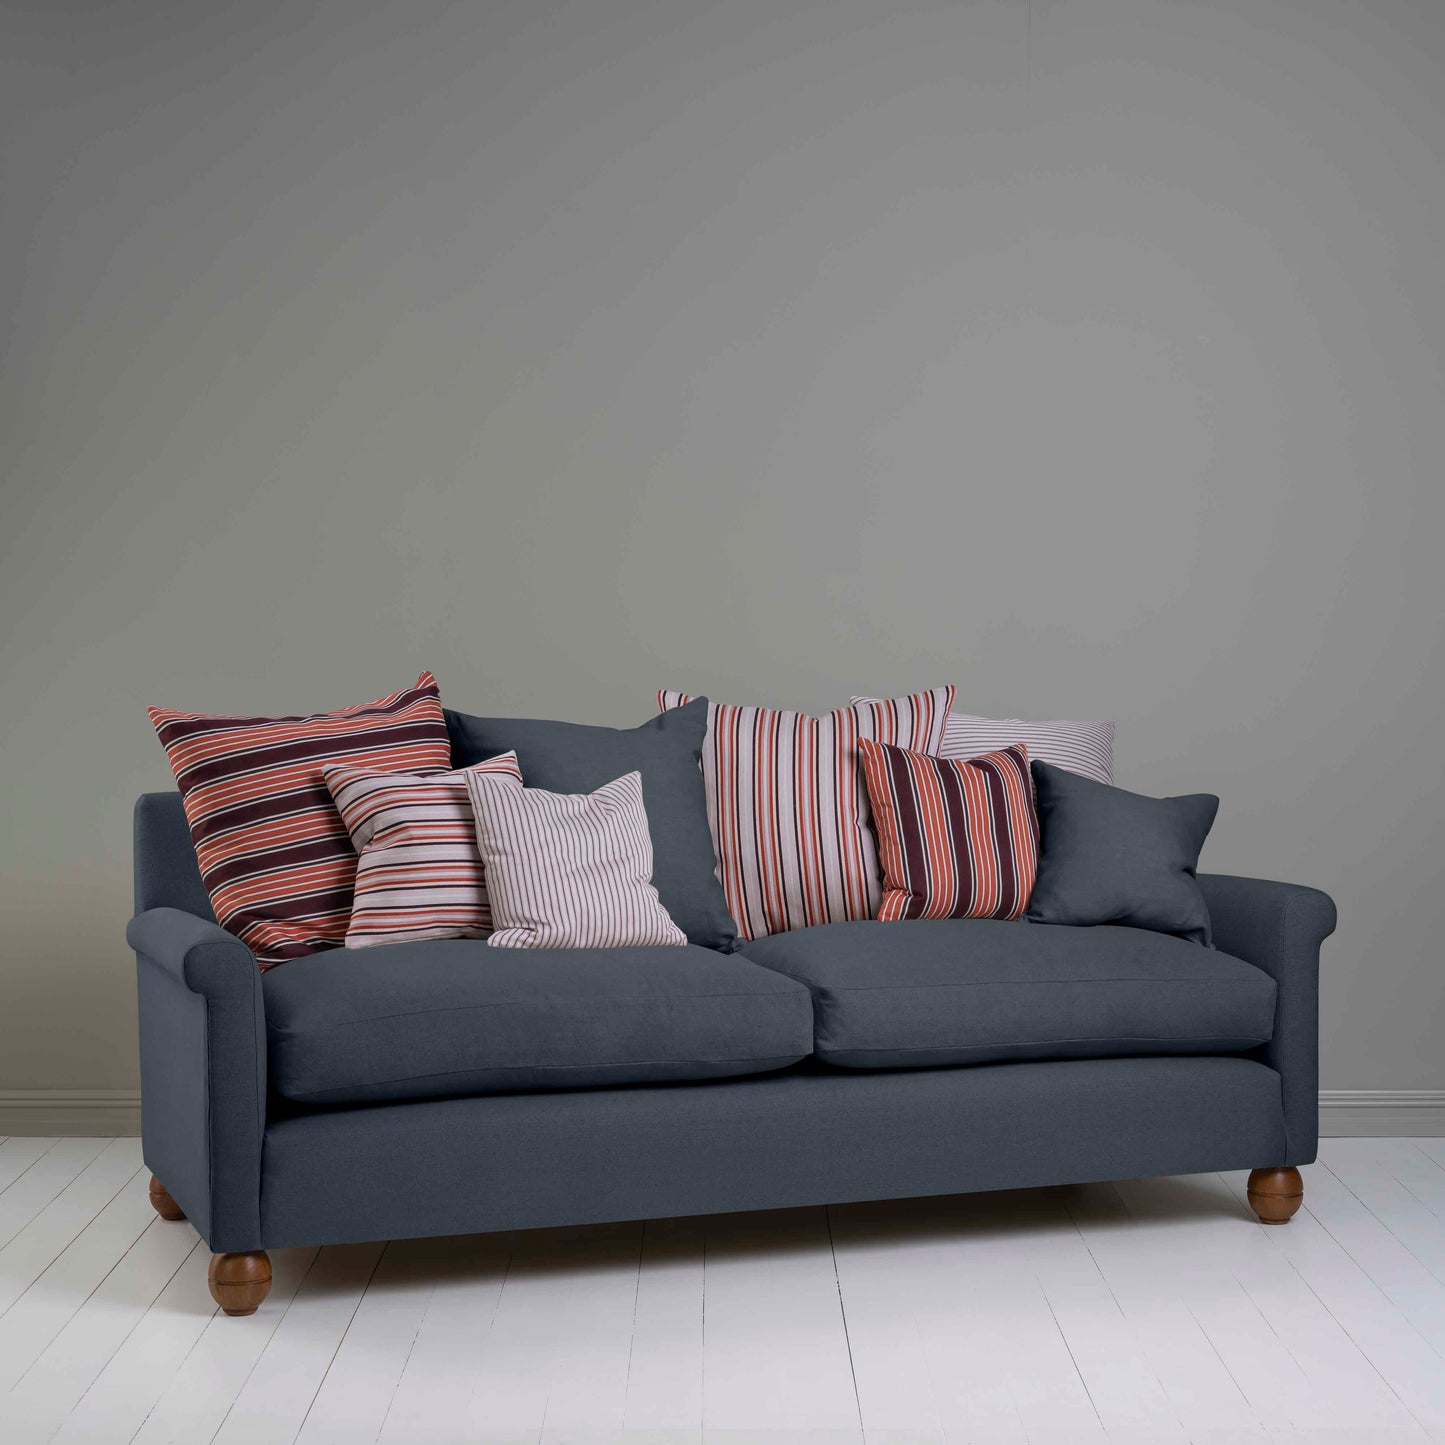 Idler 4 seater sofa in Laidback Linen Midnight